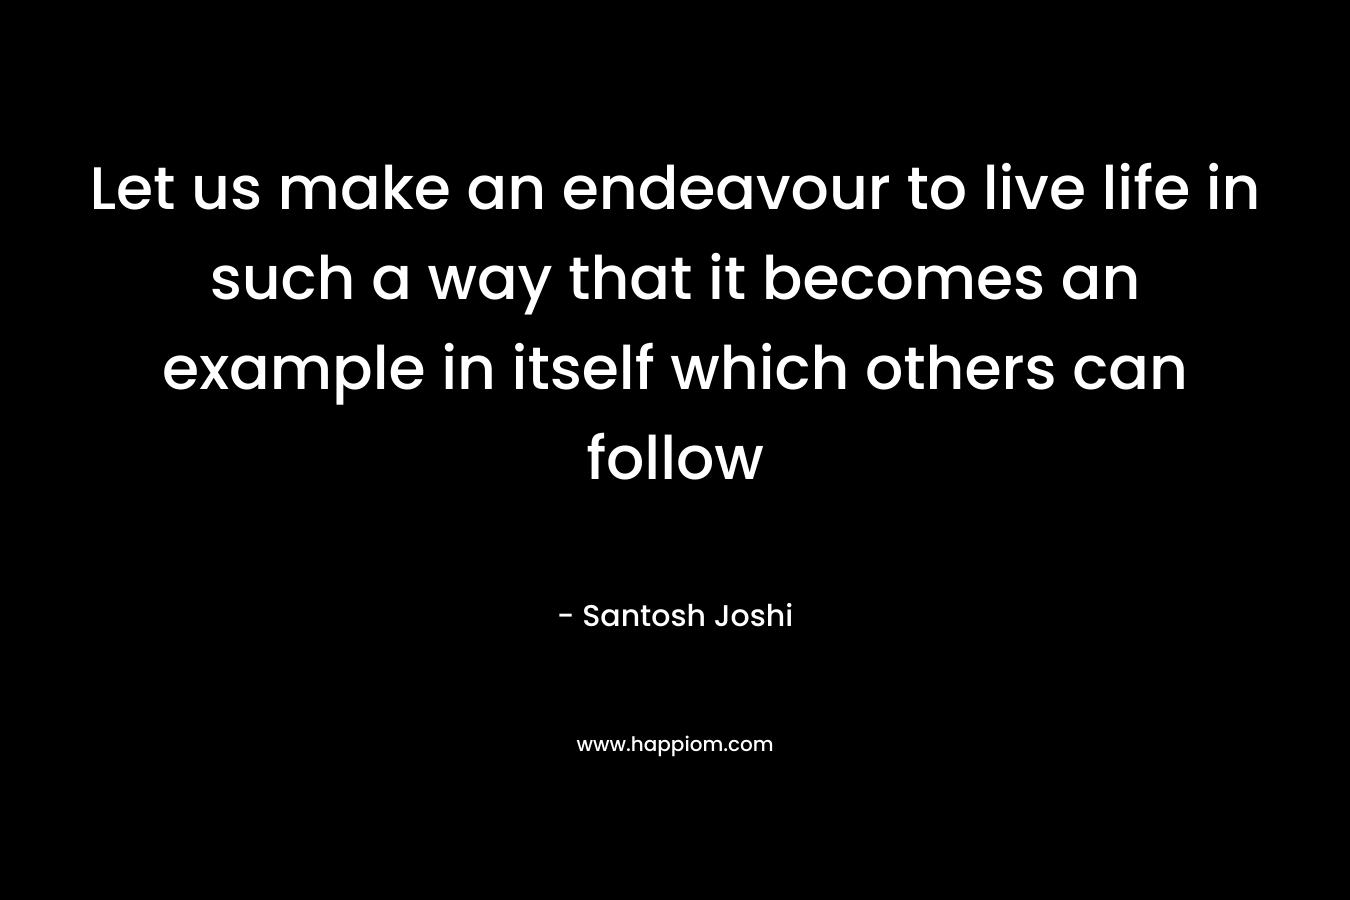 Let us make an endeavour to live life in such a way that it becomes an example in itself which others can follow – Santosh Joshi